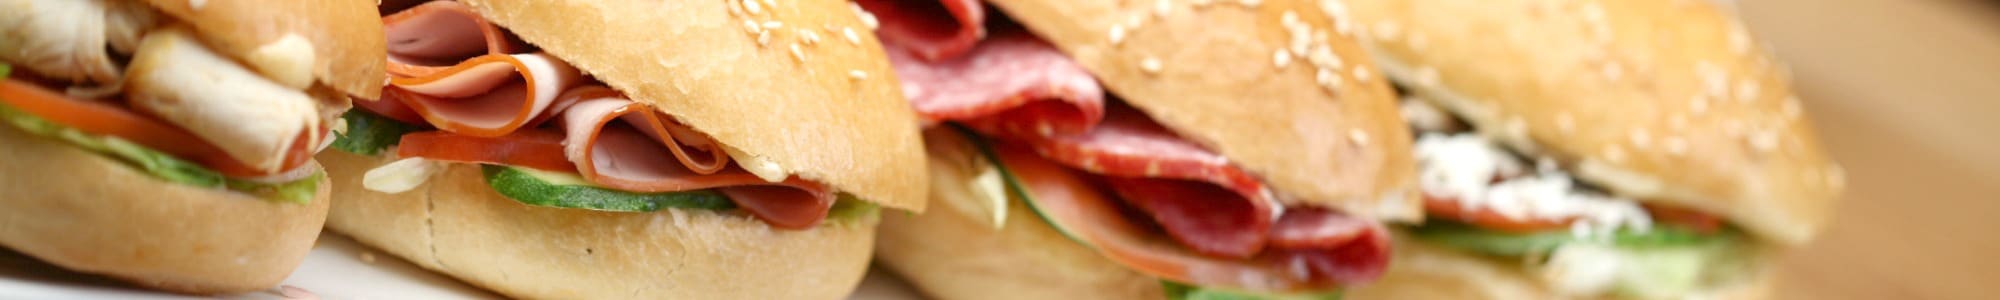 Sandwiches and Burgers banner image